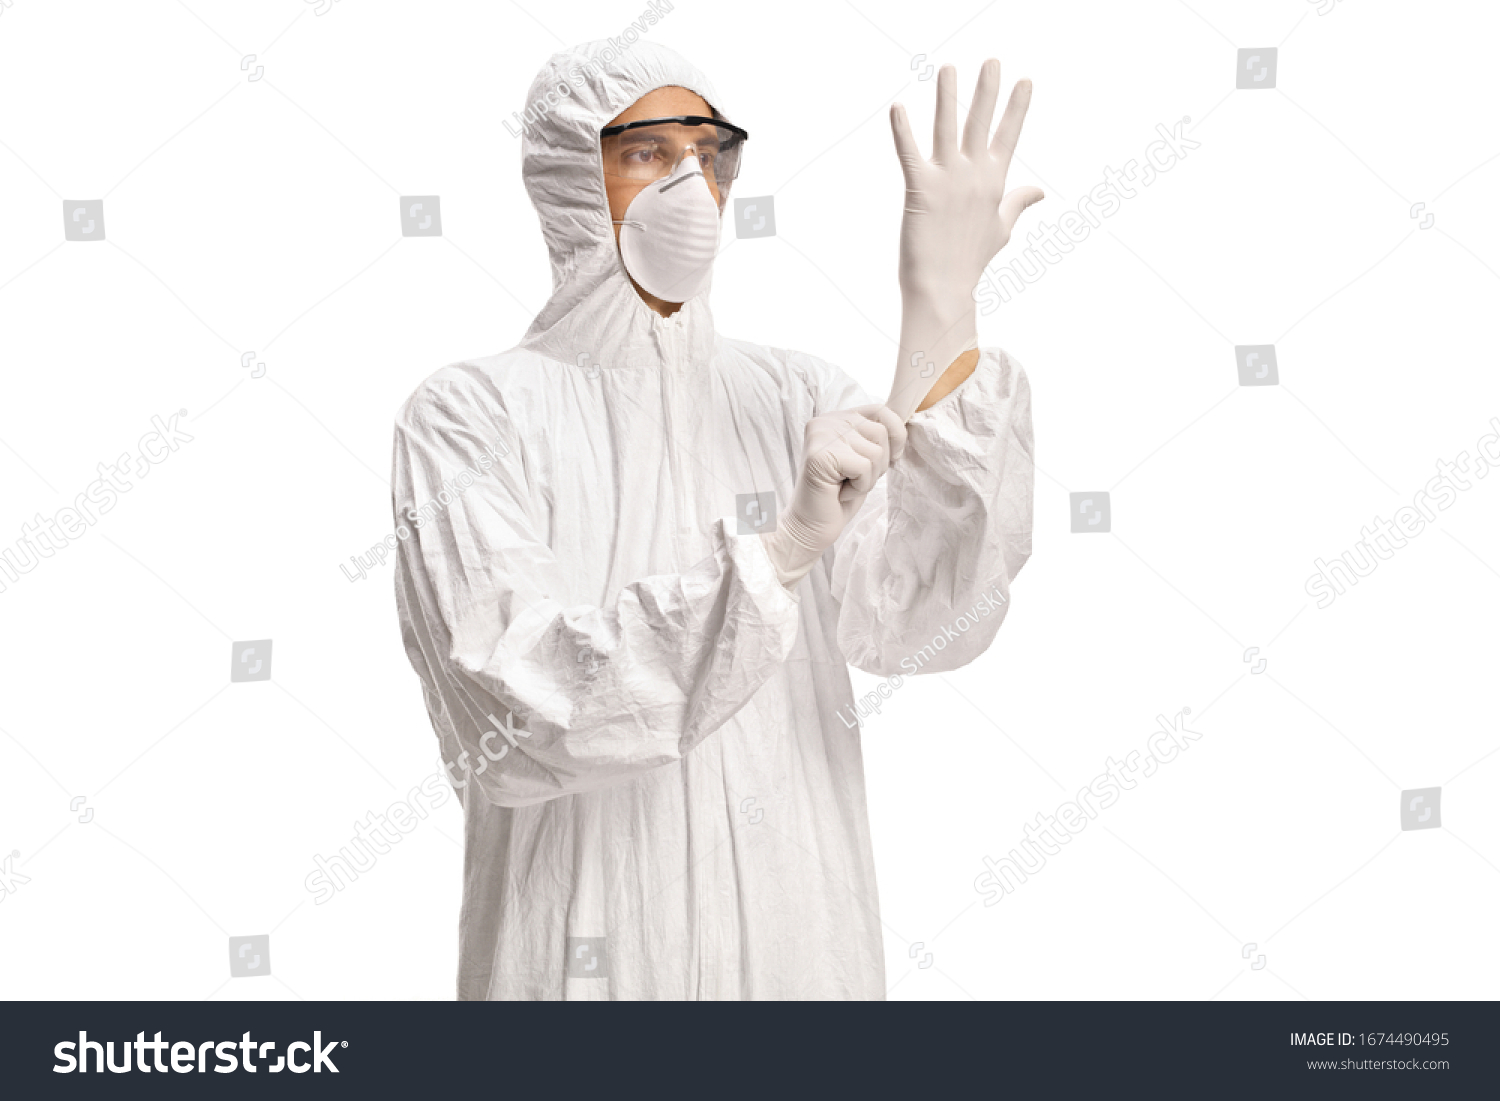 Man in a white decontamination suit putting on medical gloves isolated on white background #1674490495